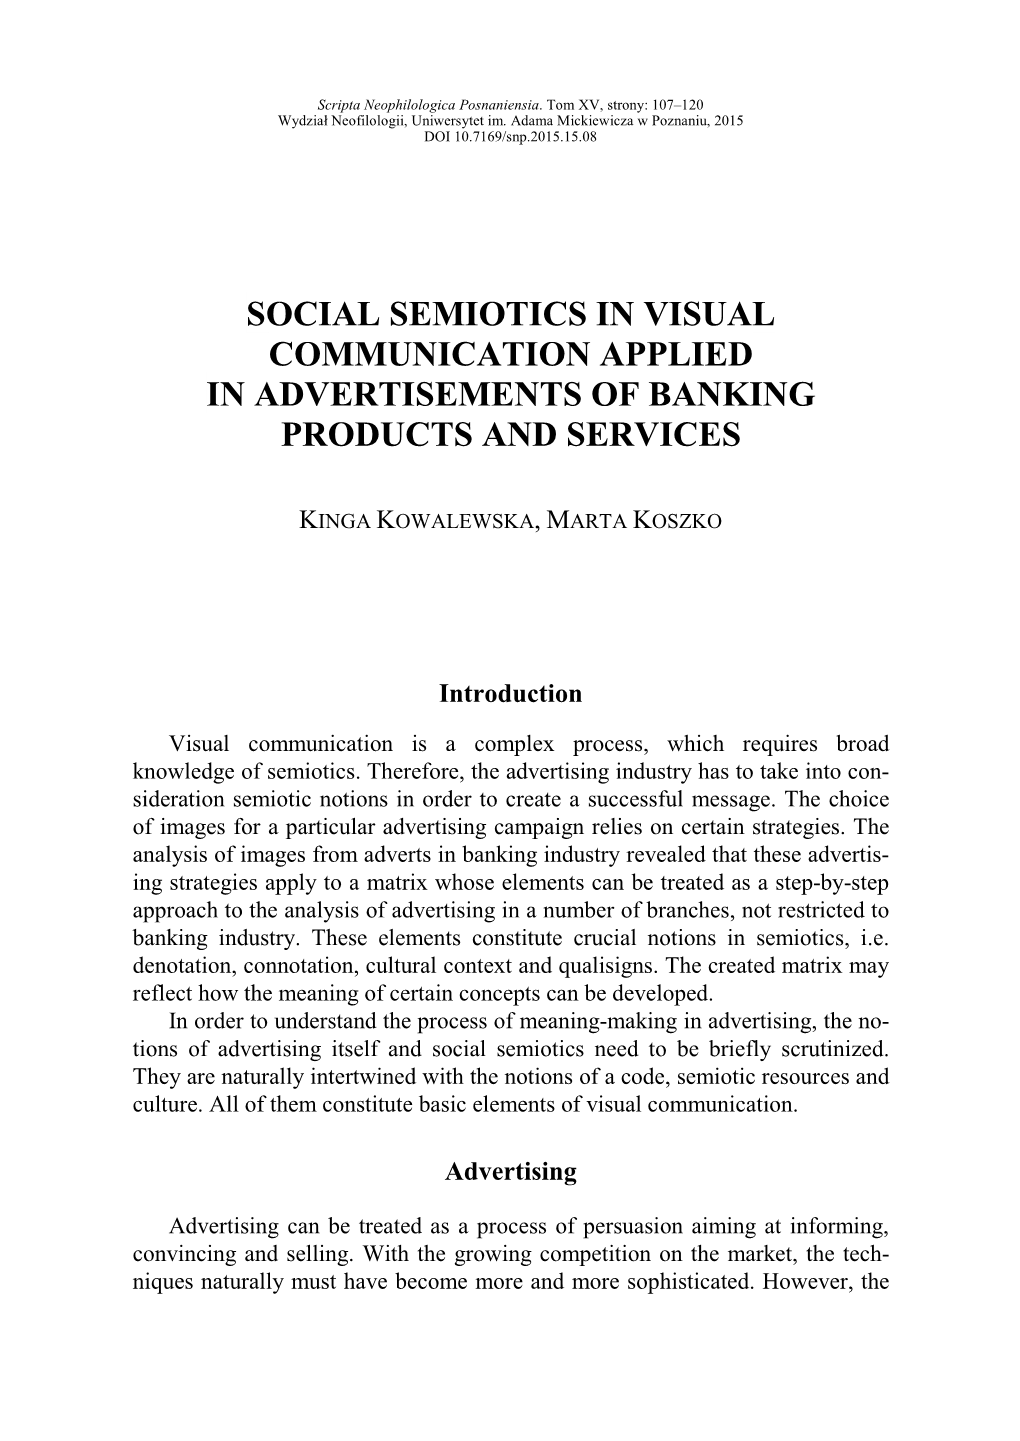 Social Semiotics in Visual Communication Applied in Advertisements of Banking Products and Services